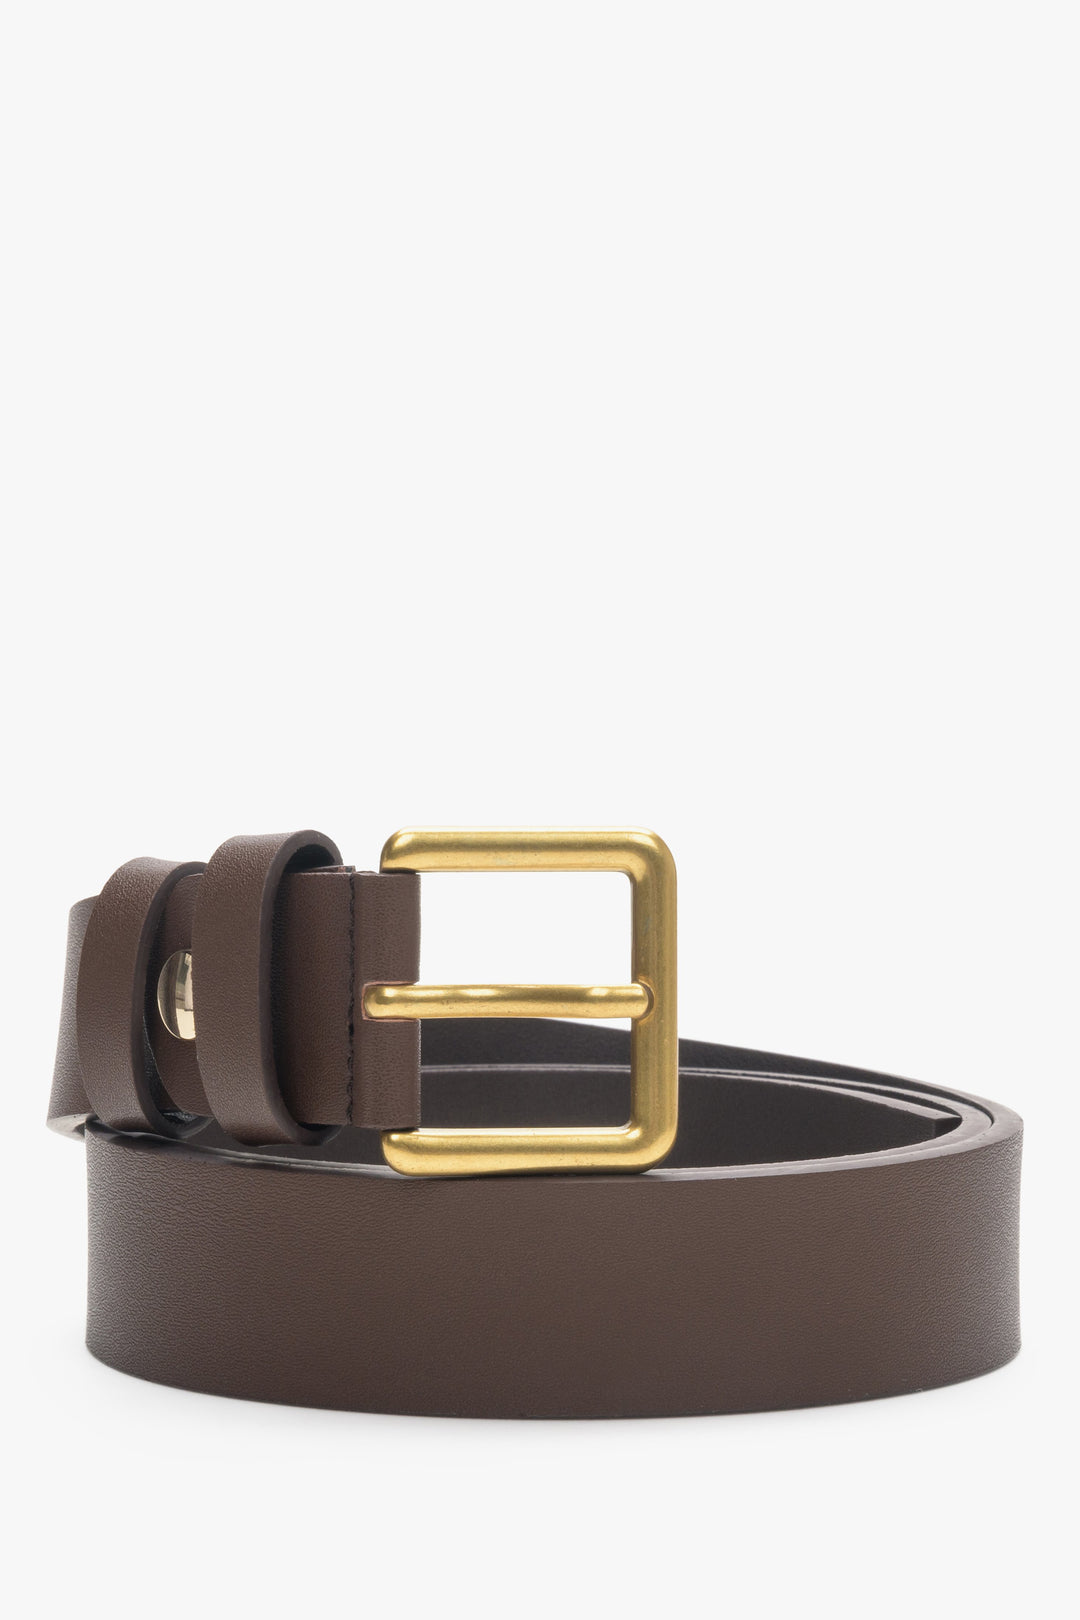 Brown Women's Leather Belt with Gold Buckle and Tapered End Estro ER00113196.